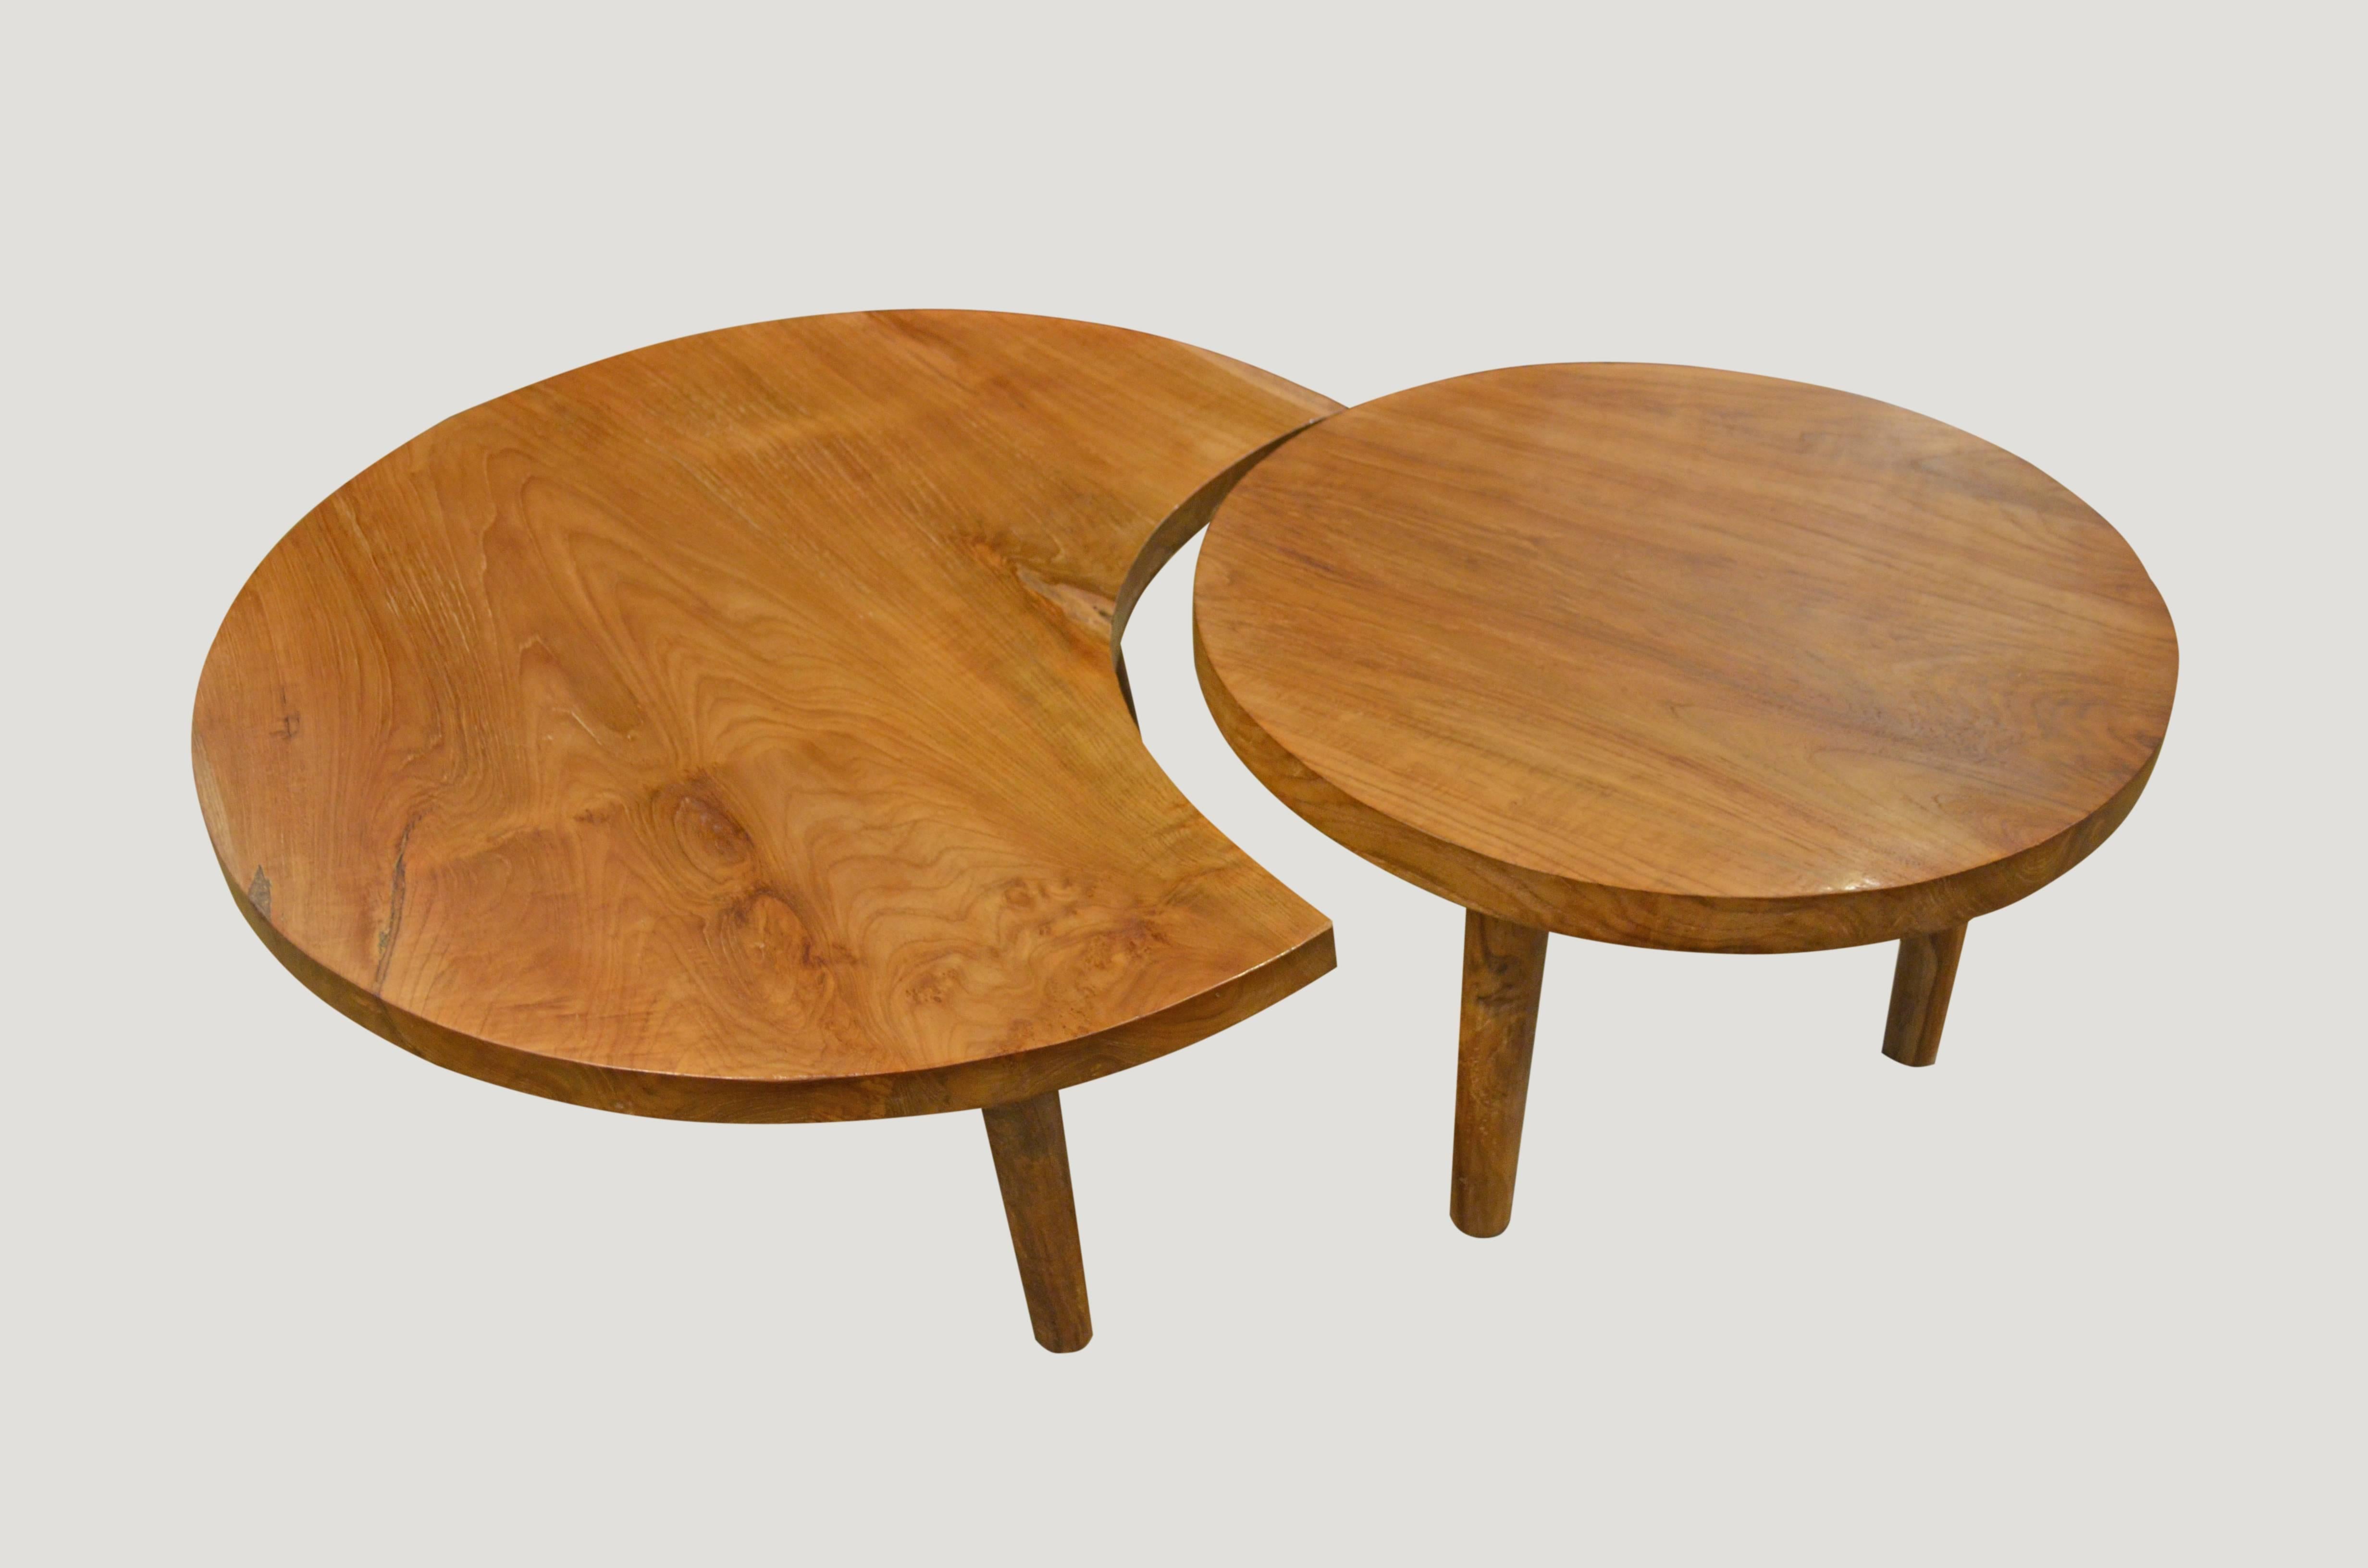 Single slab, reclaimed natural teak coffee or side table floating on Mid-Century style legs. The price and dimensions reflect the moon shaped table. Many shapes and sizes available. Please inquire.